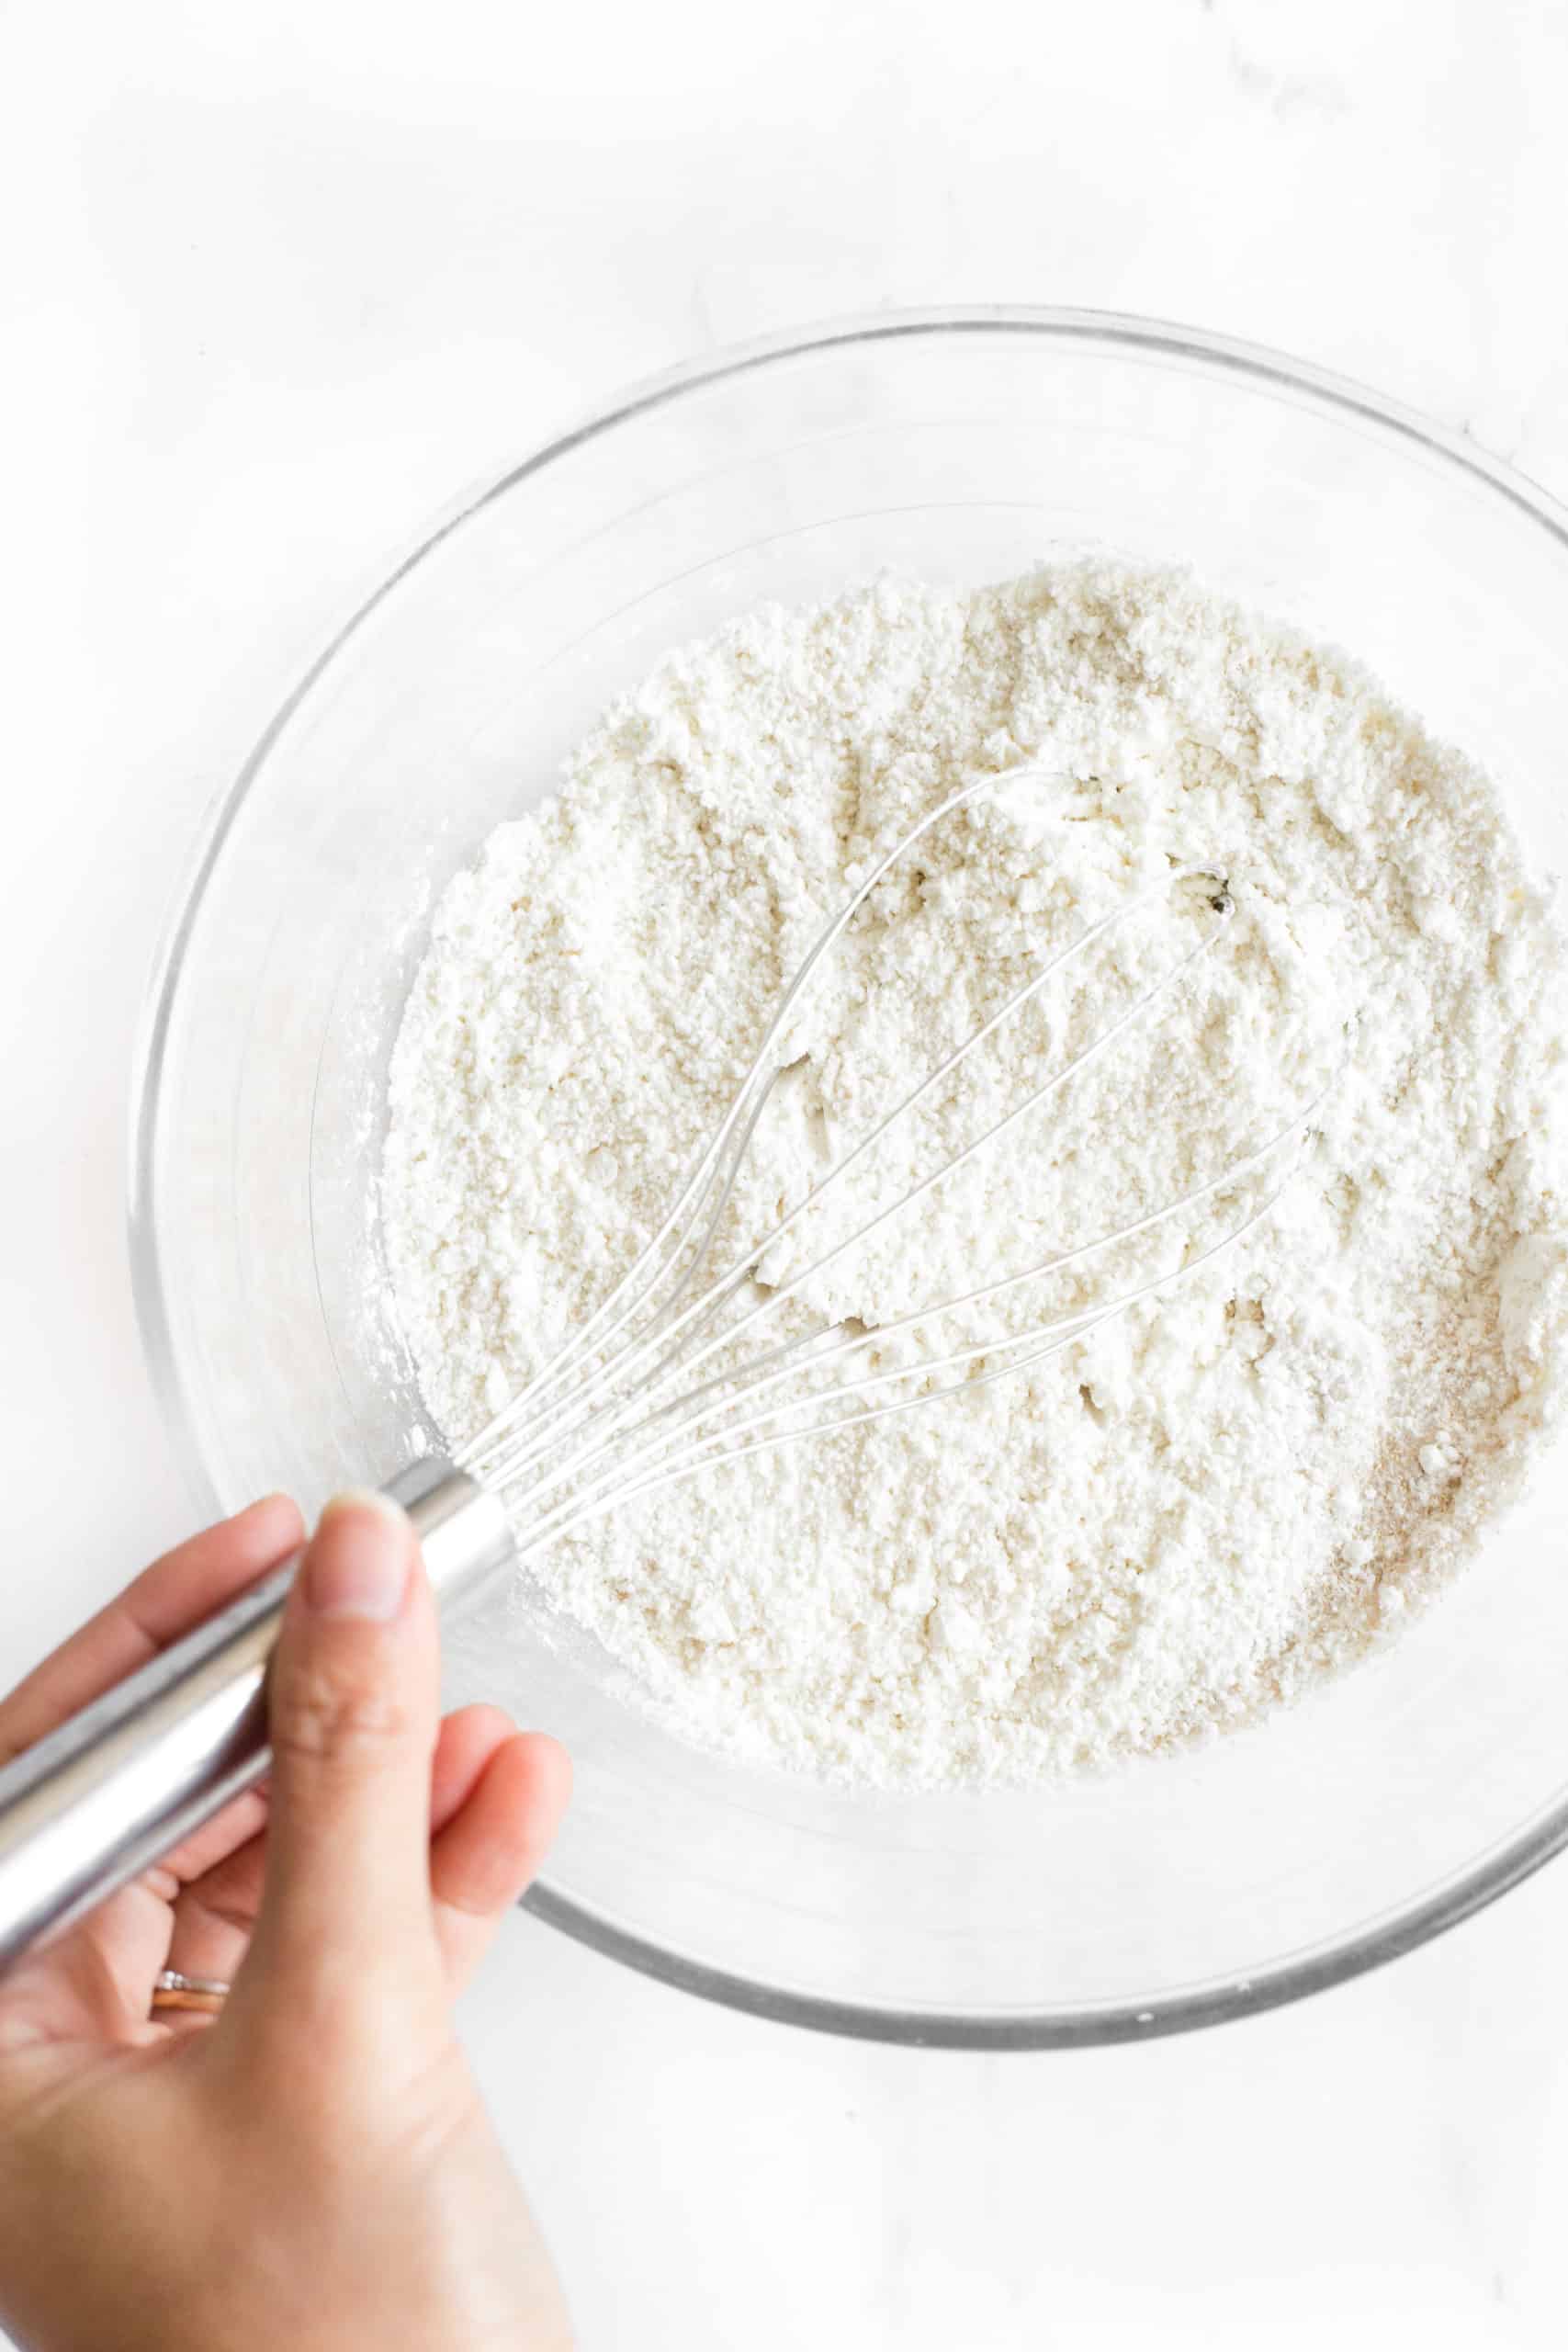 Whisking dry ingredients in a mixing bowl.